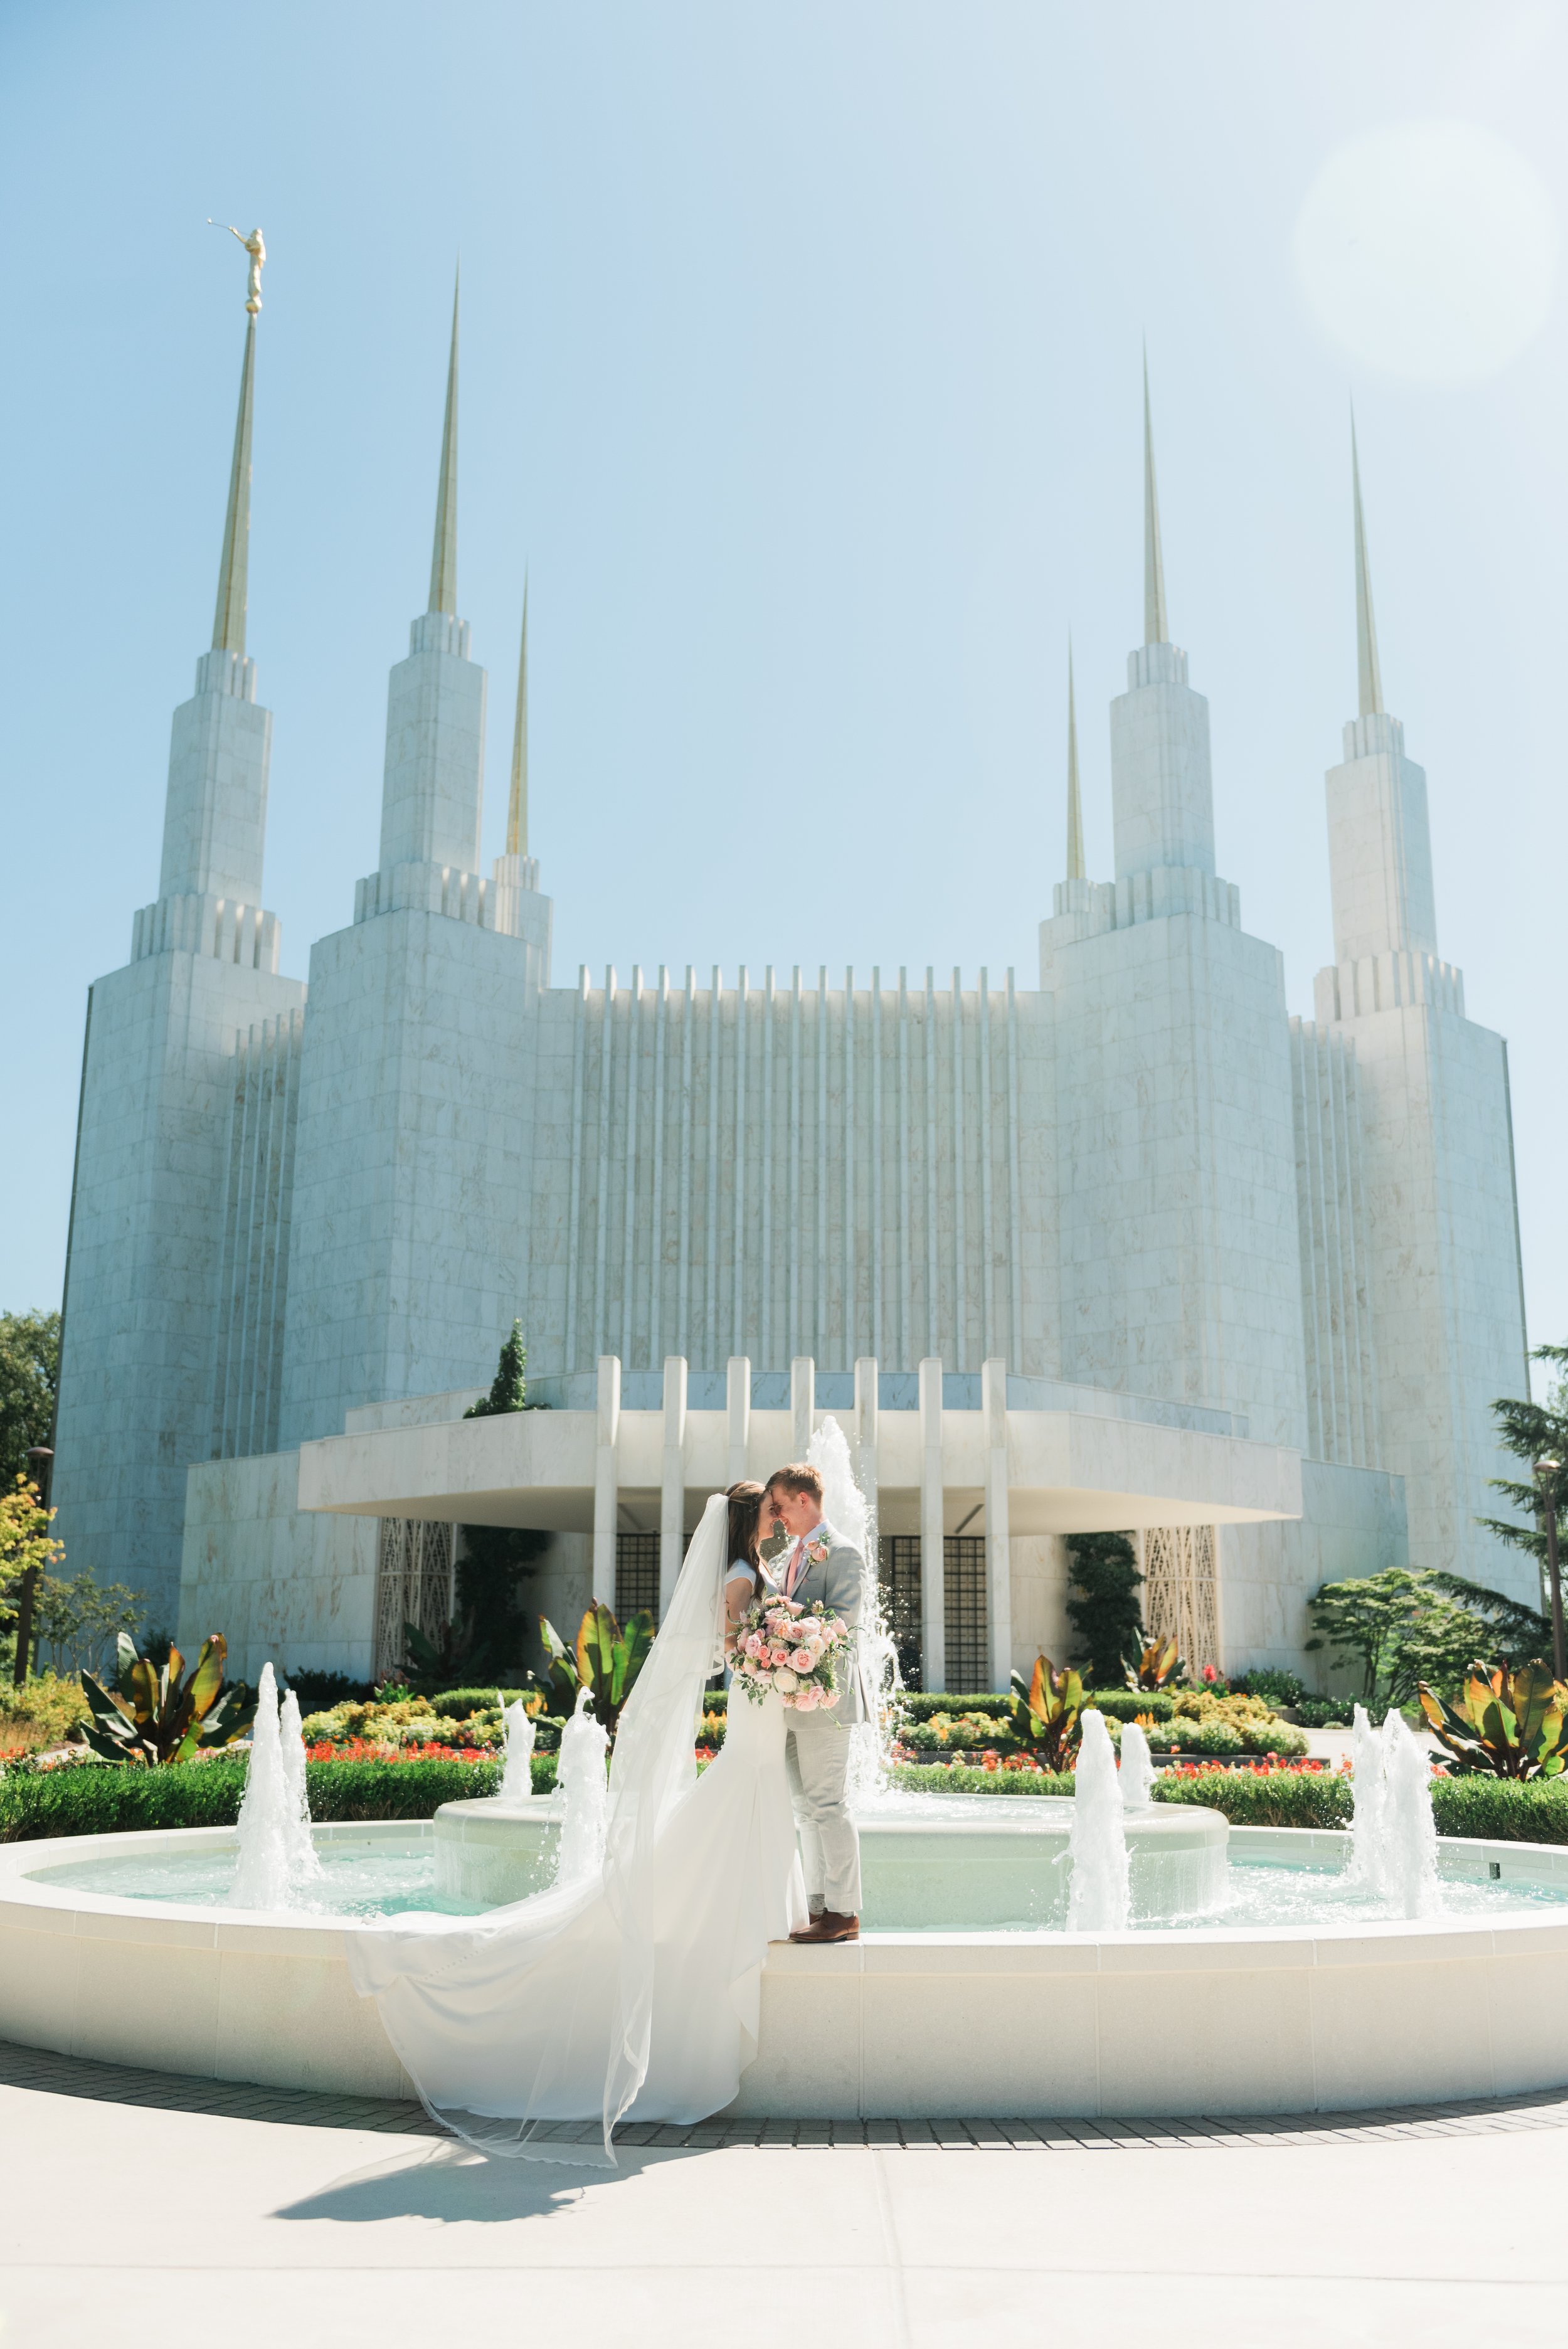  A bride and groom share a kiss on the fountain after their sealing in the Atlanta, Georgia LDS temple. #marylandweddingphotographer #atlantaweddingphotographer #brideandgroom #justmarriedphotos #bridalportraits #weddingdayphotos #Atlantatemple #LDSt